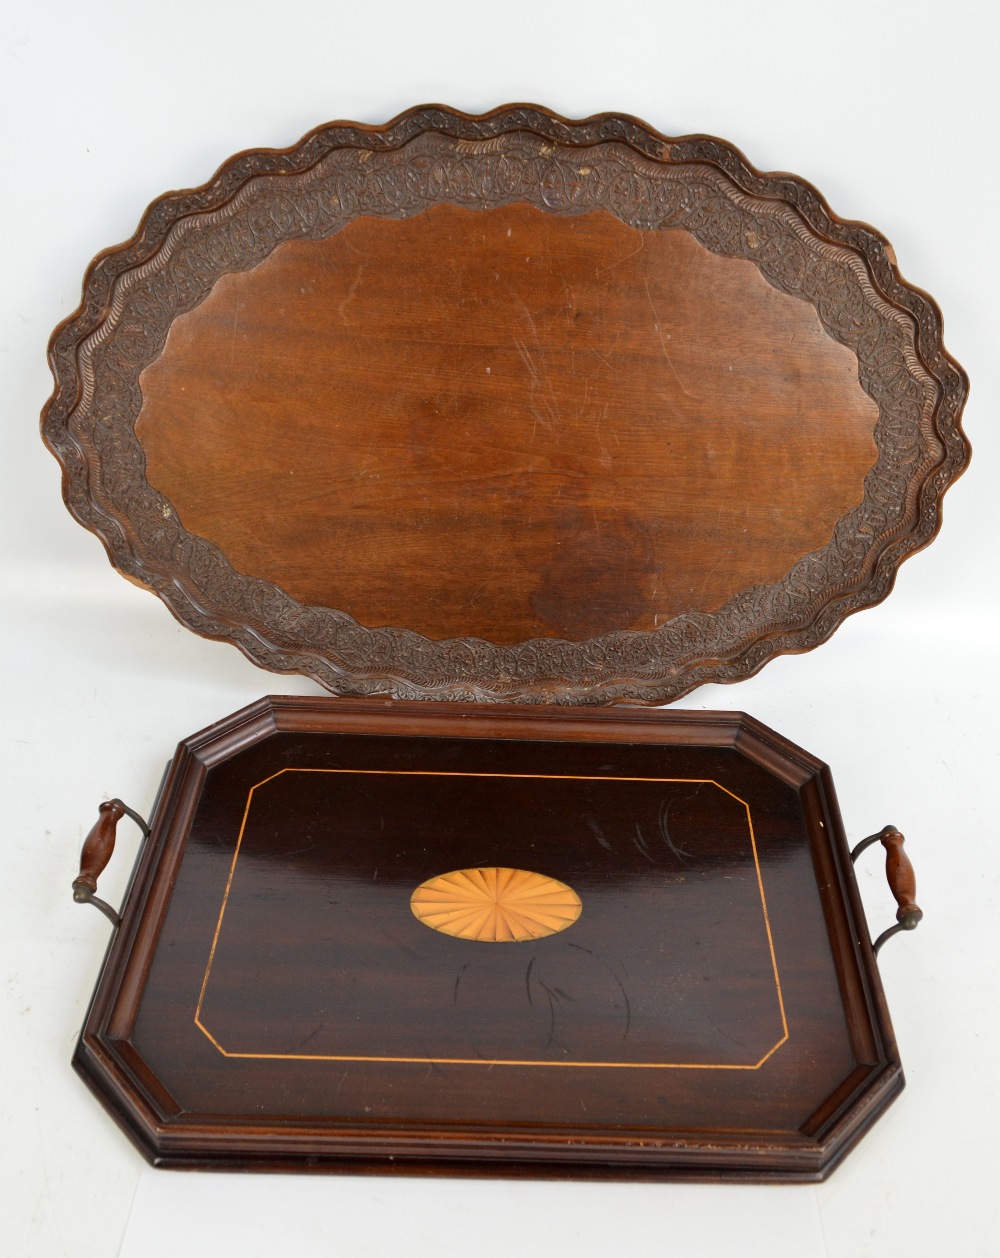 An Edwardian mahogany starburst motif inlaid twin handled rectangular tray with canted corners,